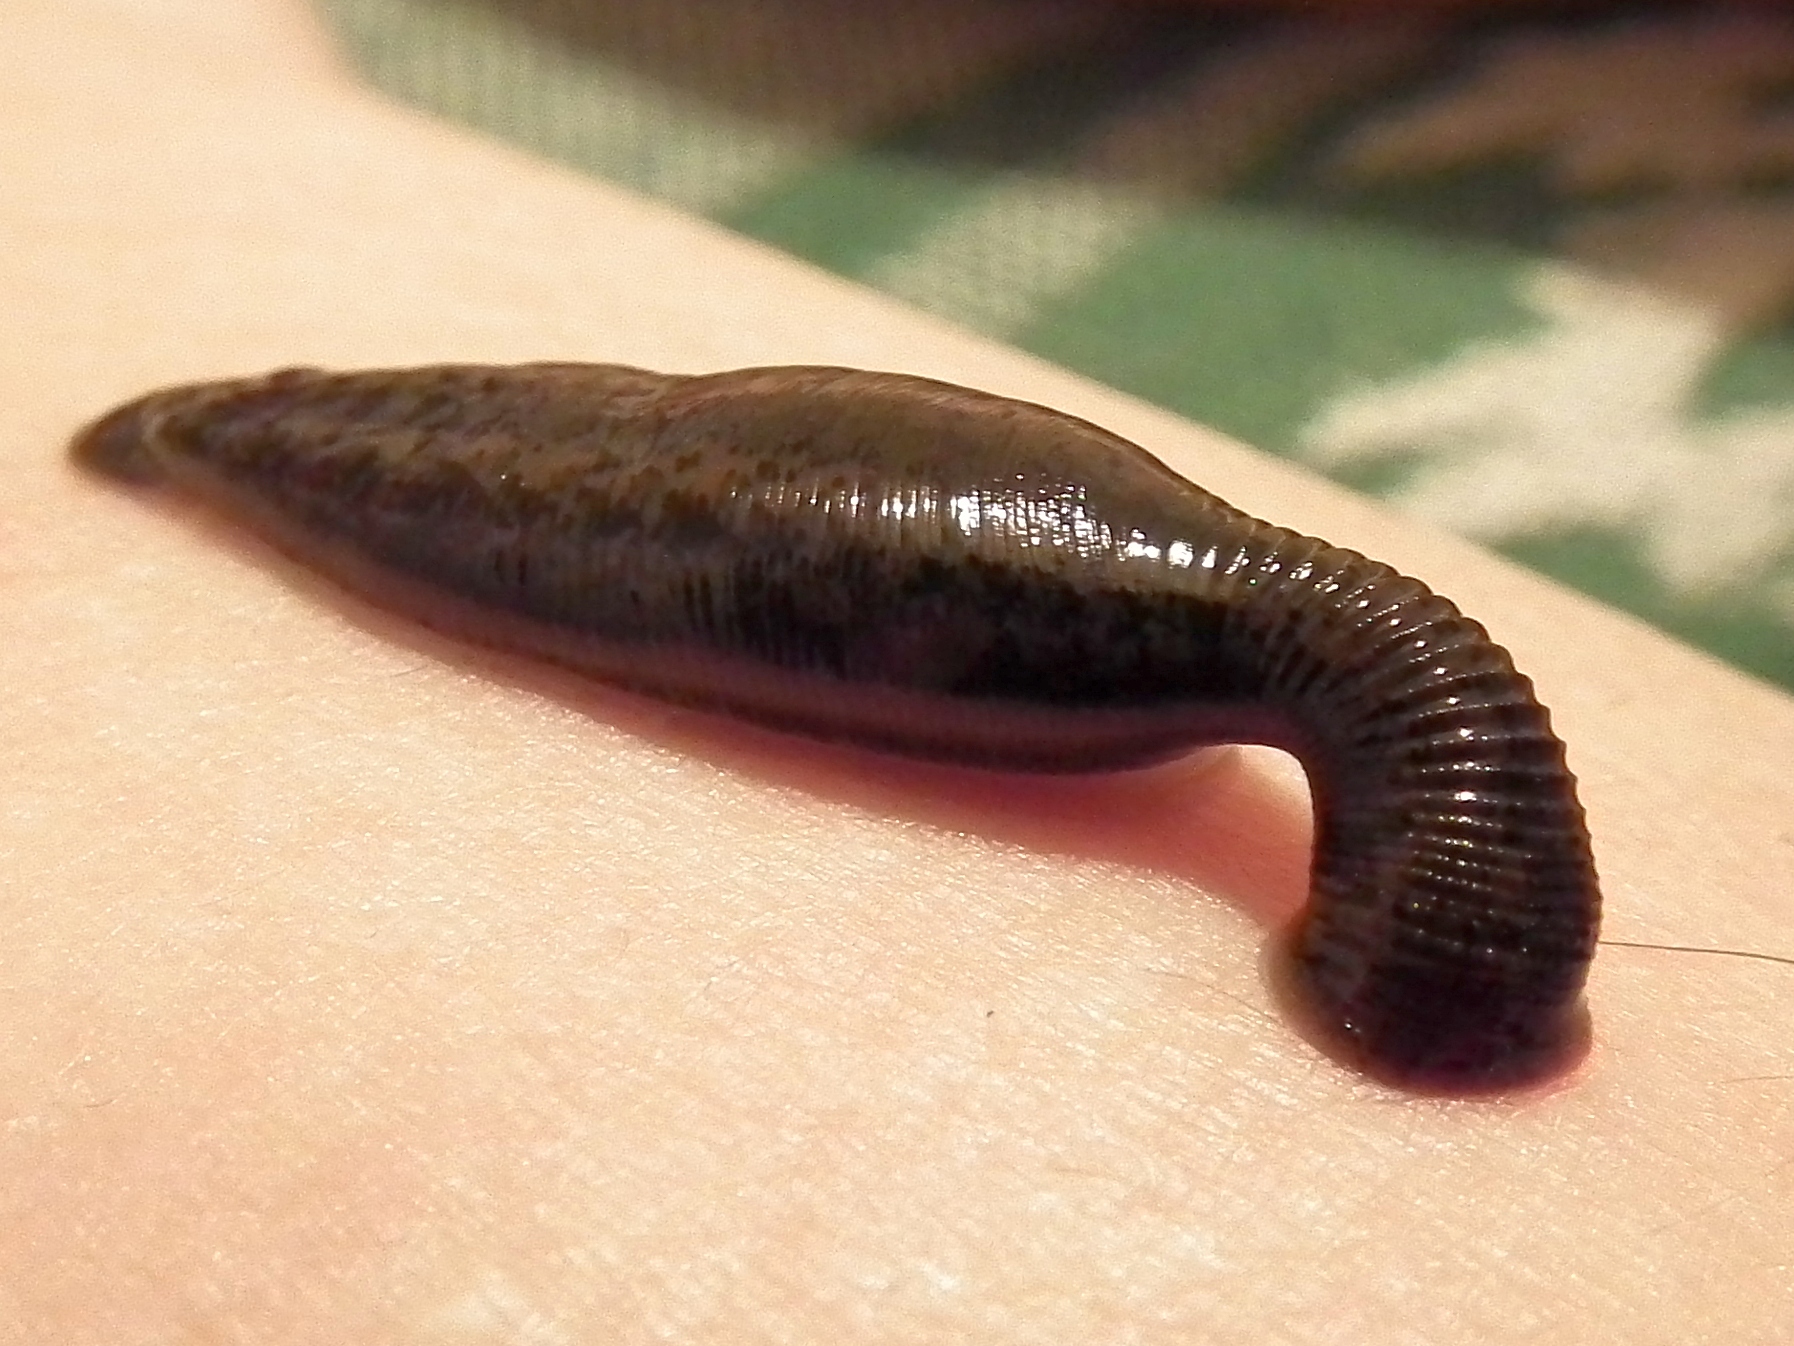 Where In the Body Have Leeches Been Found? Far Too Many Places ...